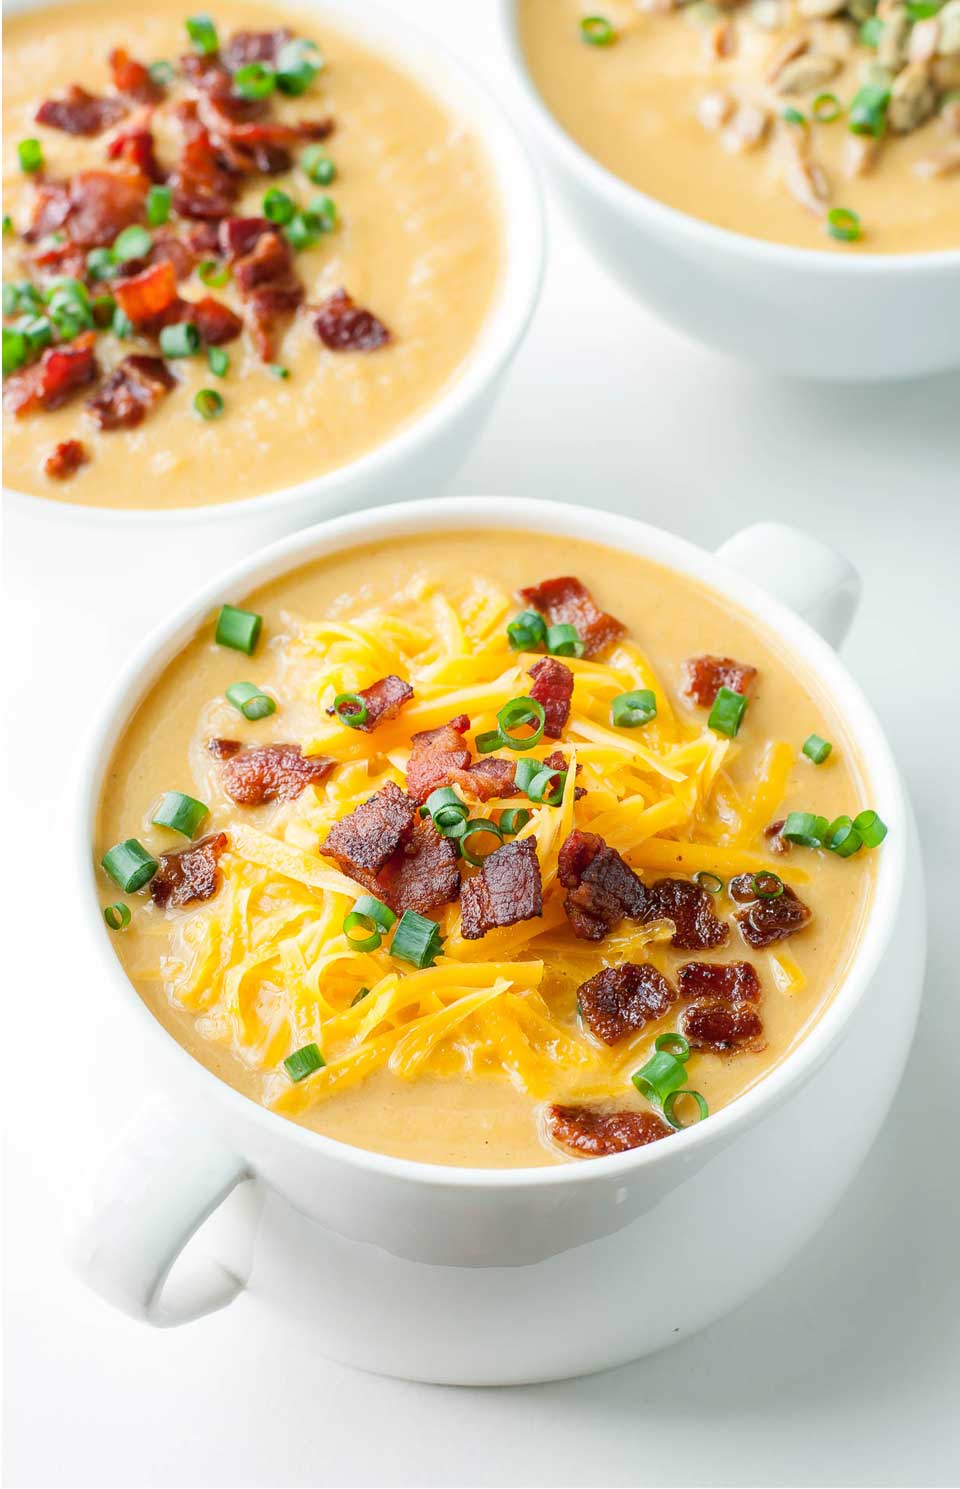 Butternut squash is a classic Thanksgiving flavor, and this pretty soup combines it deliciously with nutritious cauliflower for a creamy soup that’s a perfect starter for your Thanksgiving dinner!